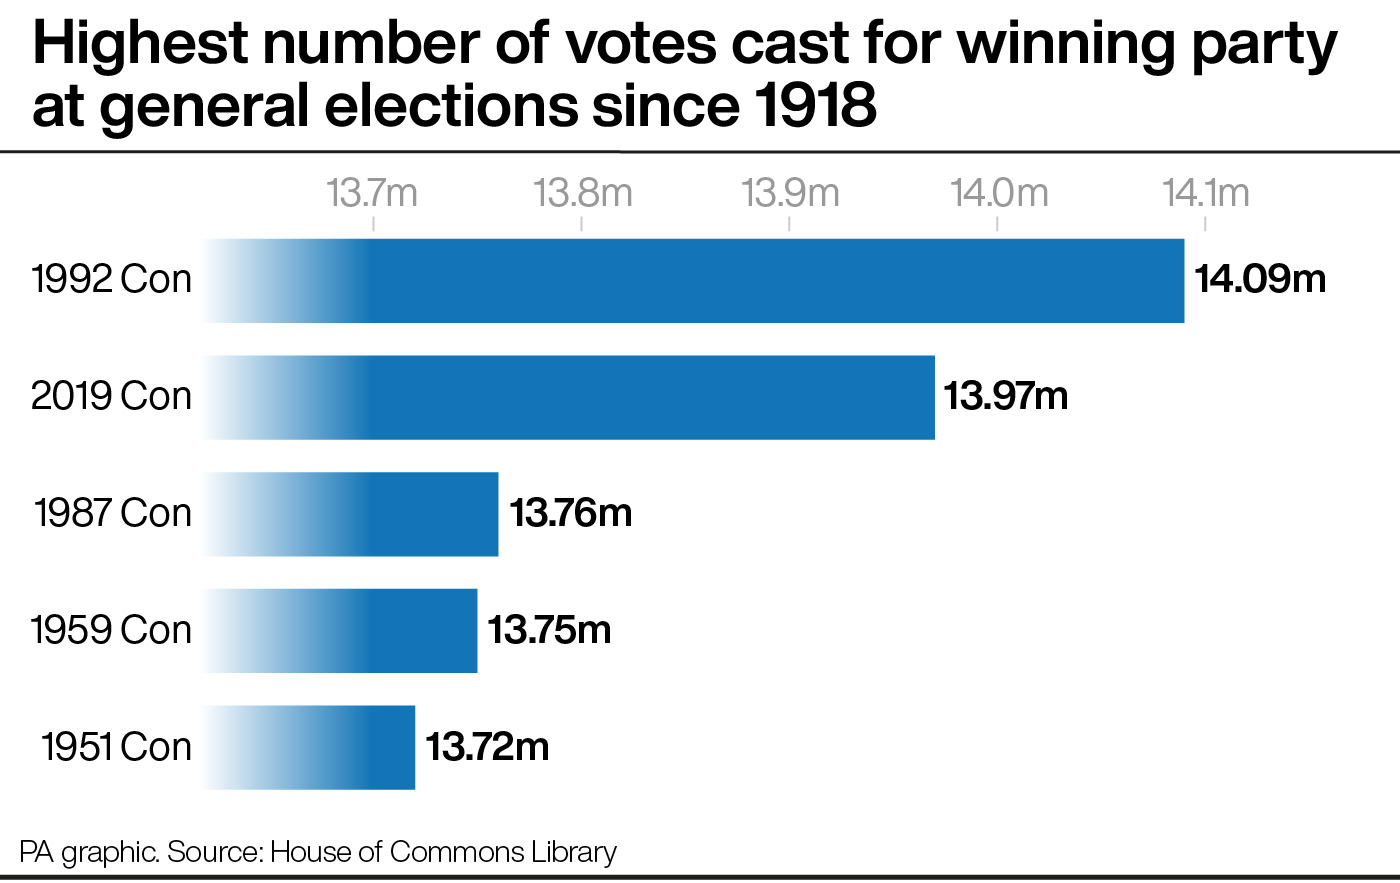 The highest number of votes cast for a winner party at general elections since 1918